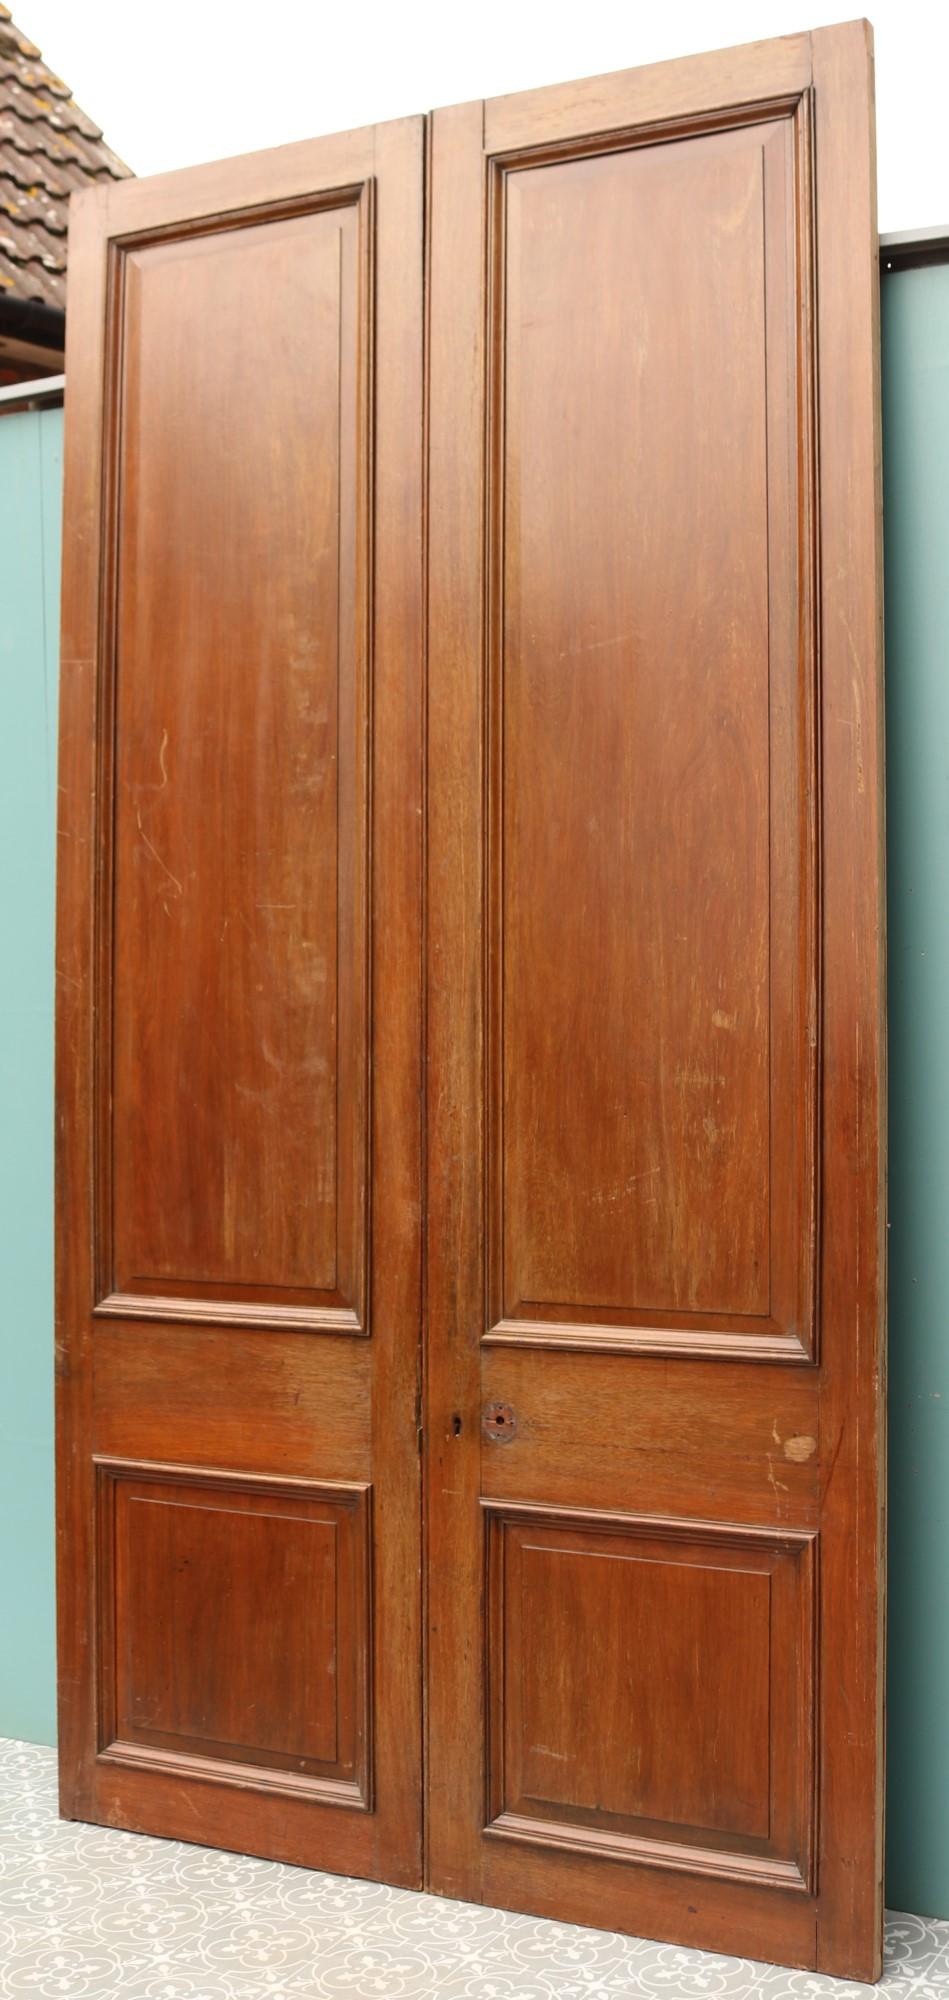 Pair of Reclaimed Teak Double Doors In Fair Condition For Sale In Wormelow, Herefordshire